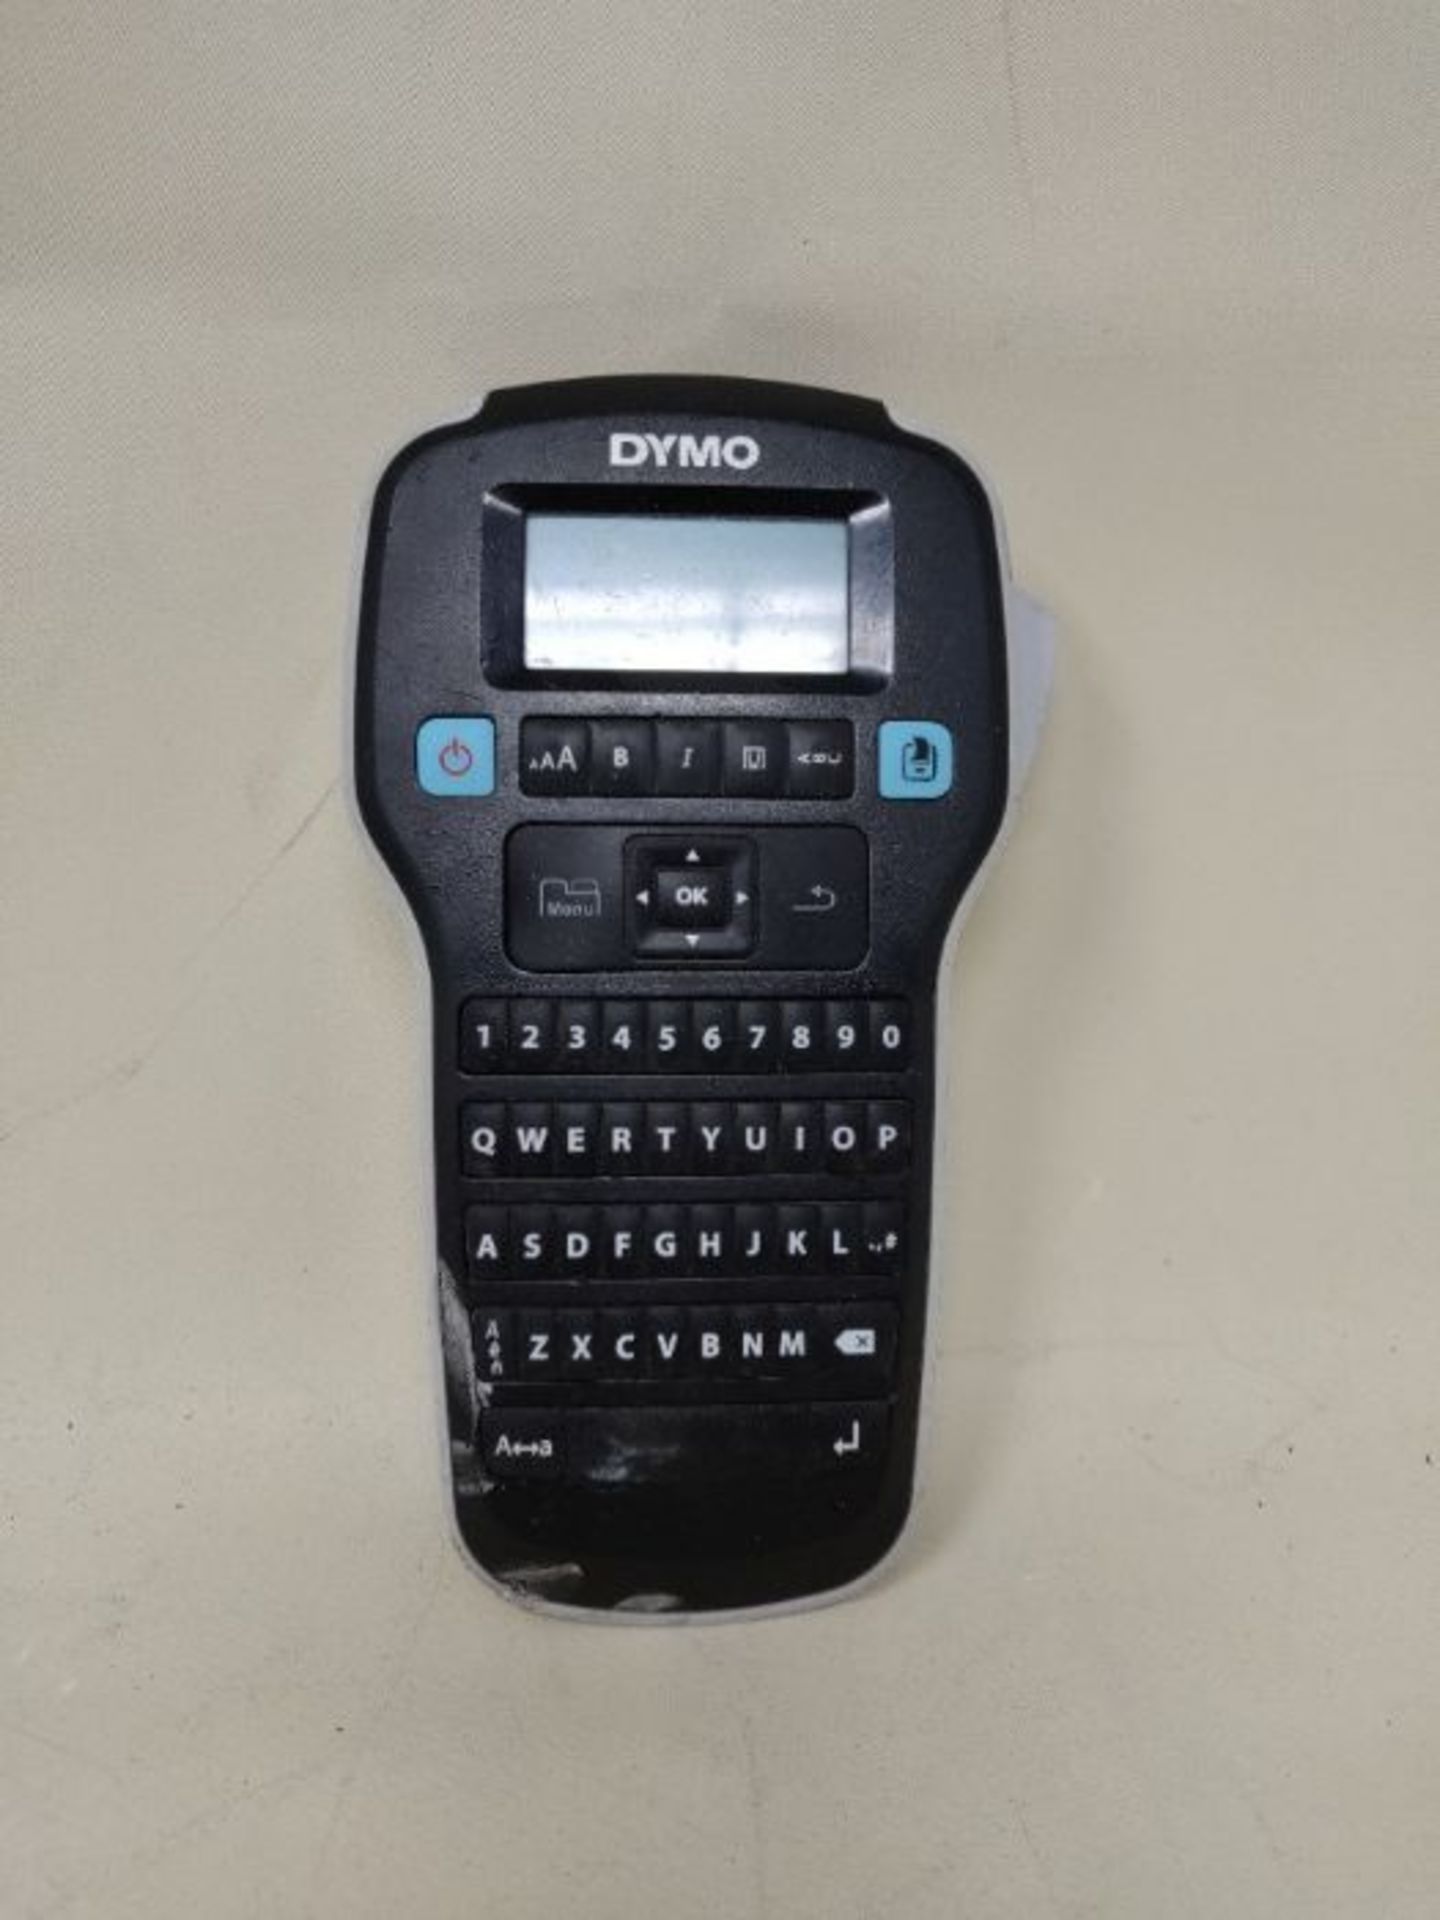 Dymo LabelManager 160 Handheld Label Maker with QWERTY Keyboard - Image 3 of 3